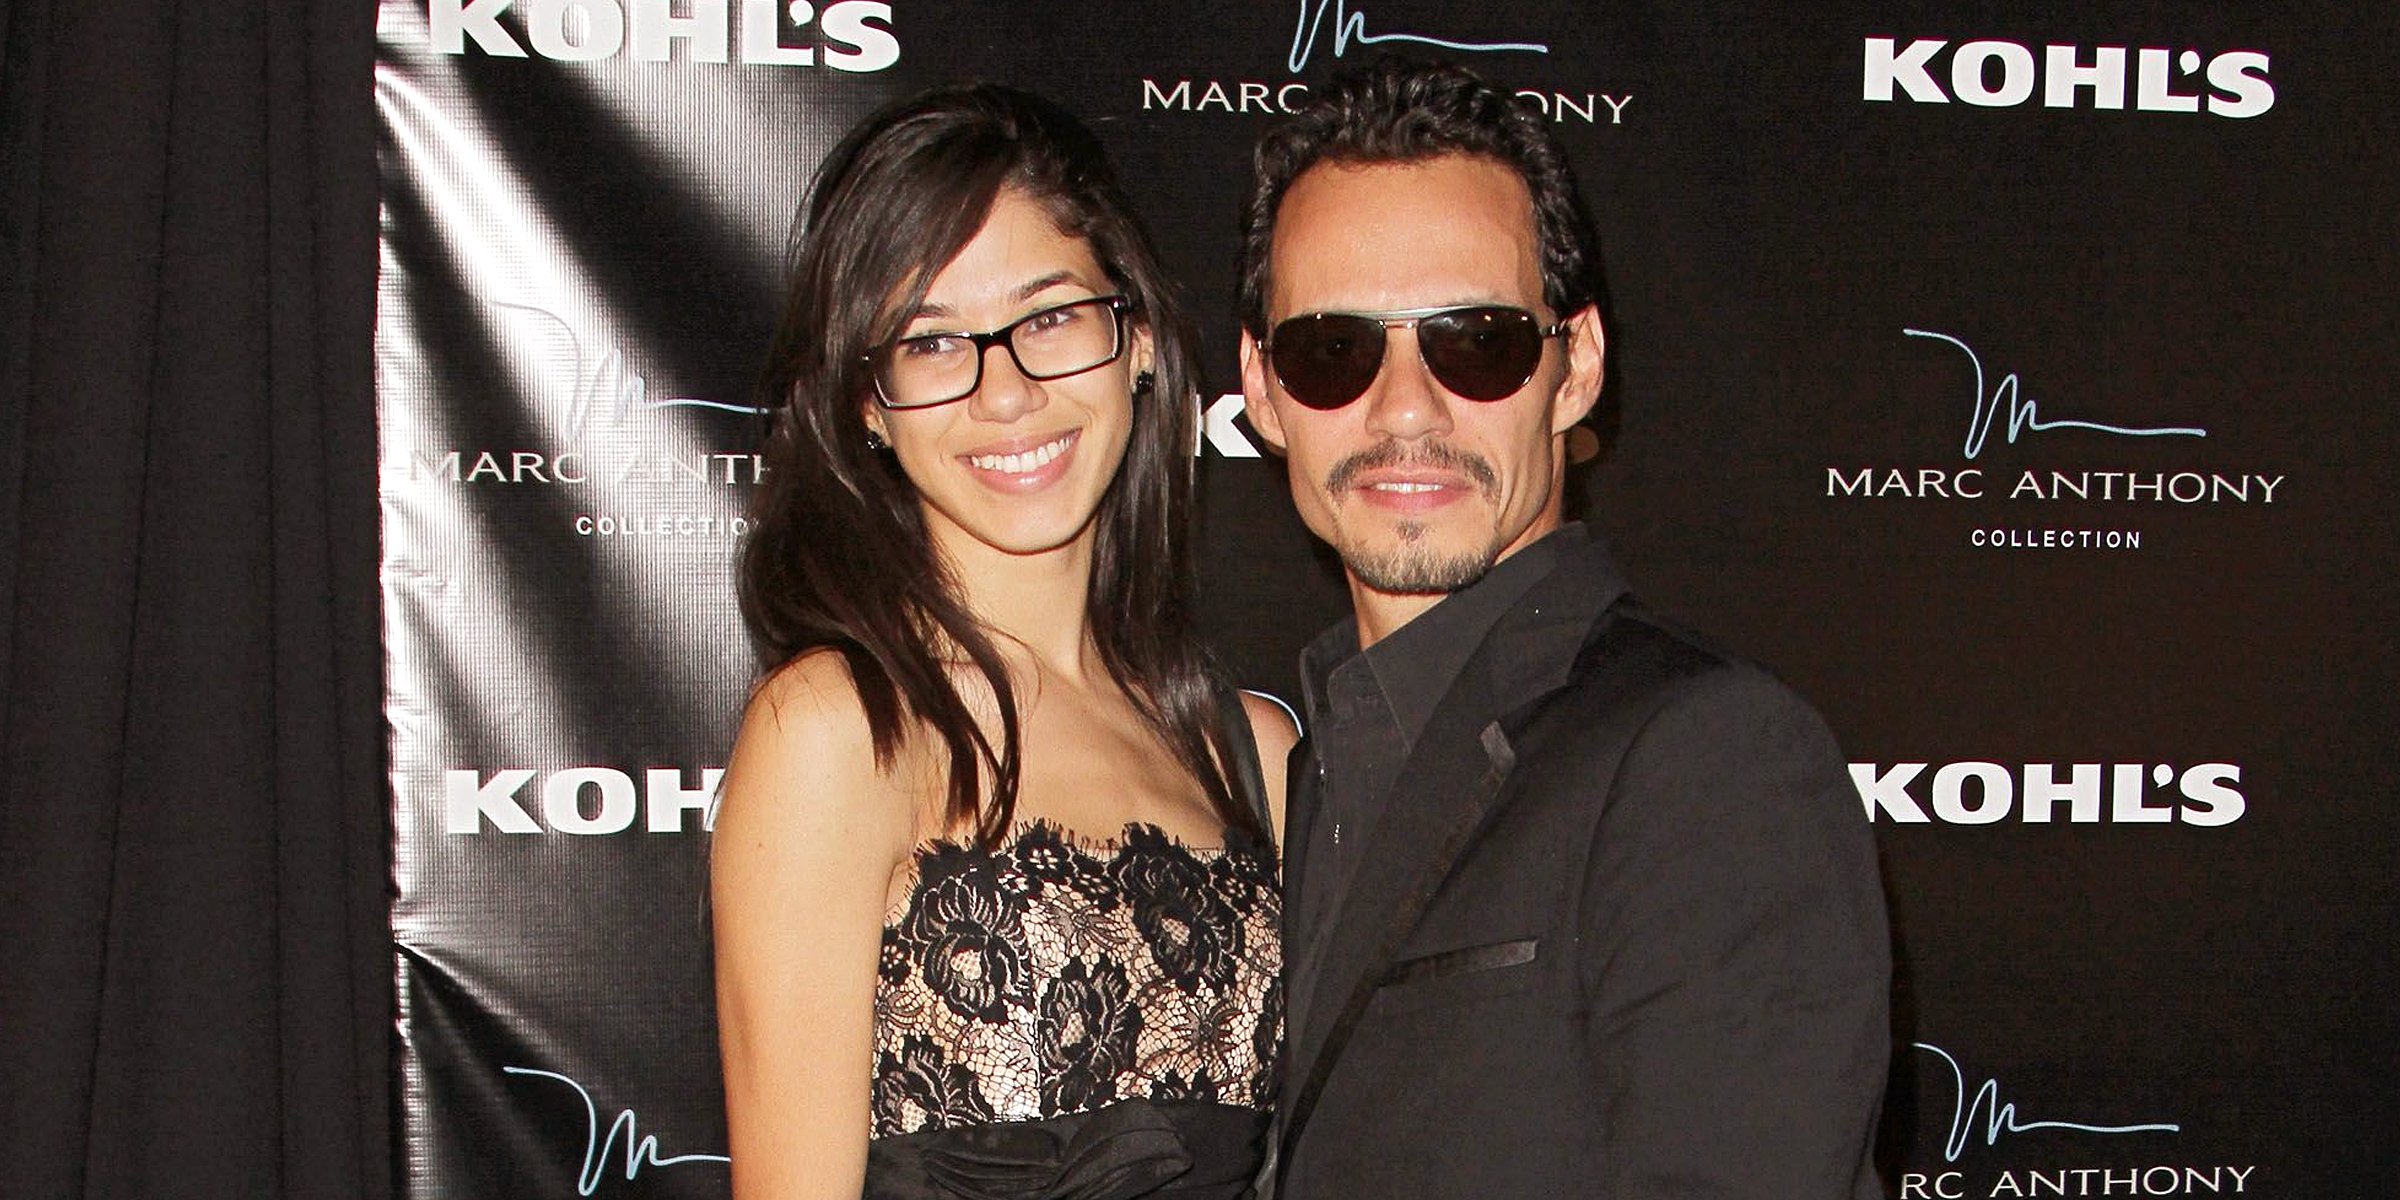 Marc Anthony and Ariana Anthony | Source: Getty Images